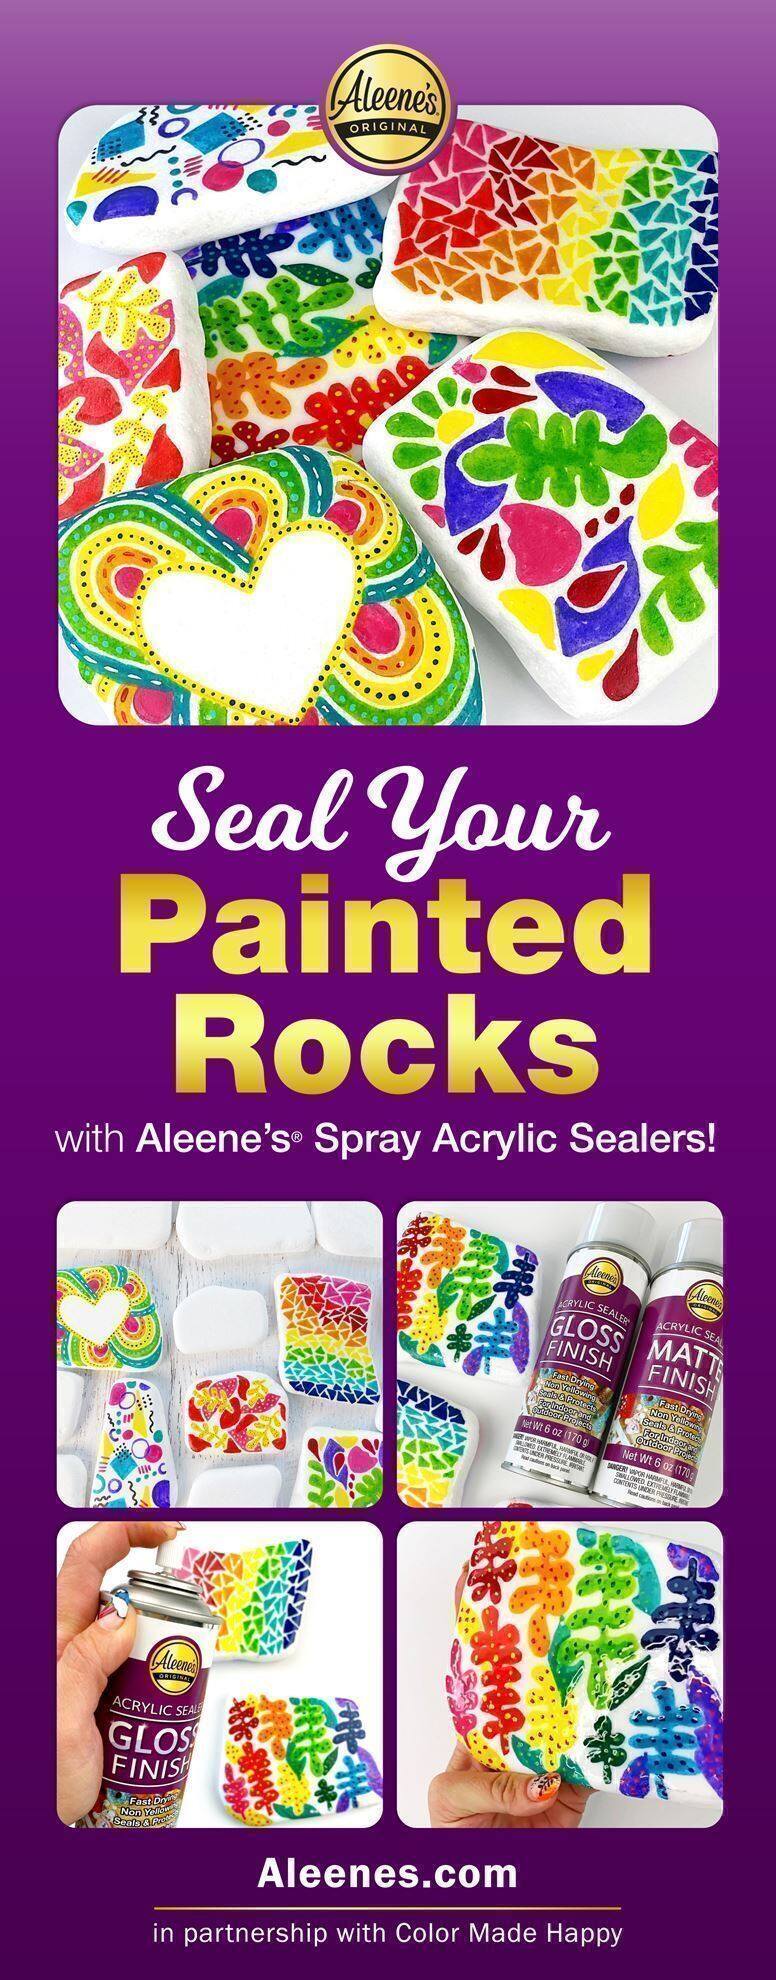 Sealing an Acrylic Pour Painting with Aleene's Spray Gloss Finish